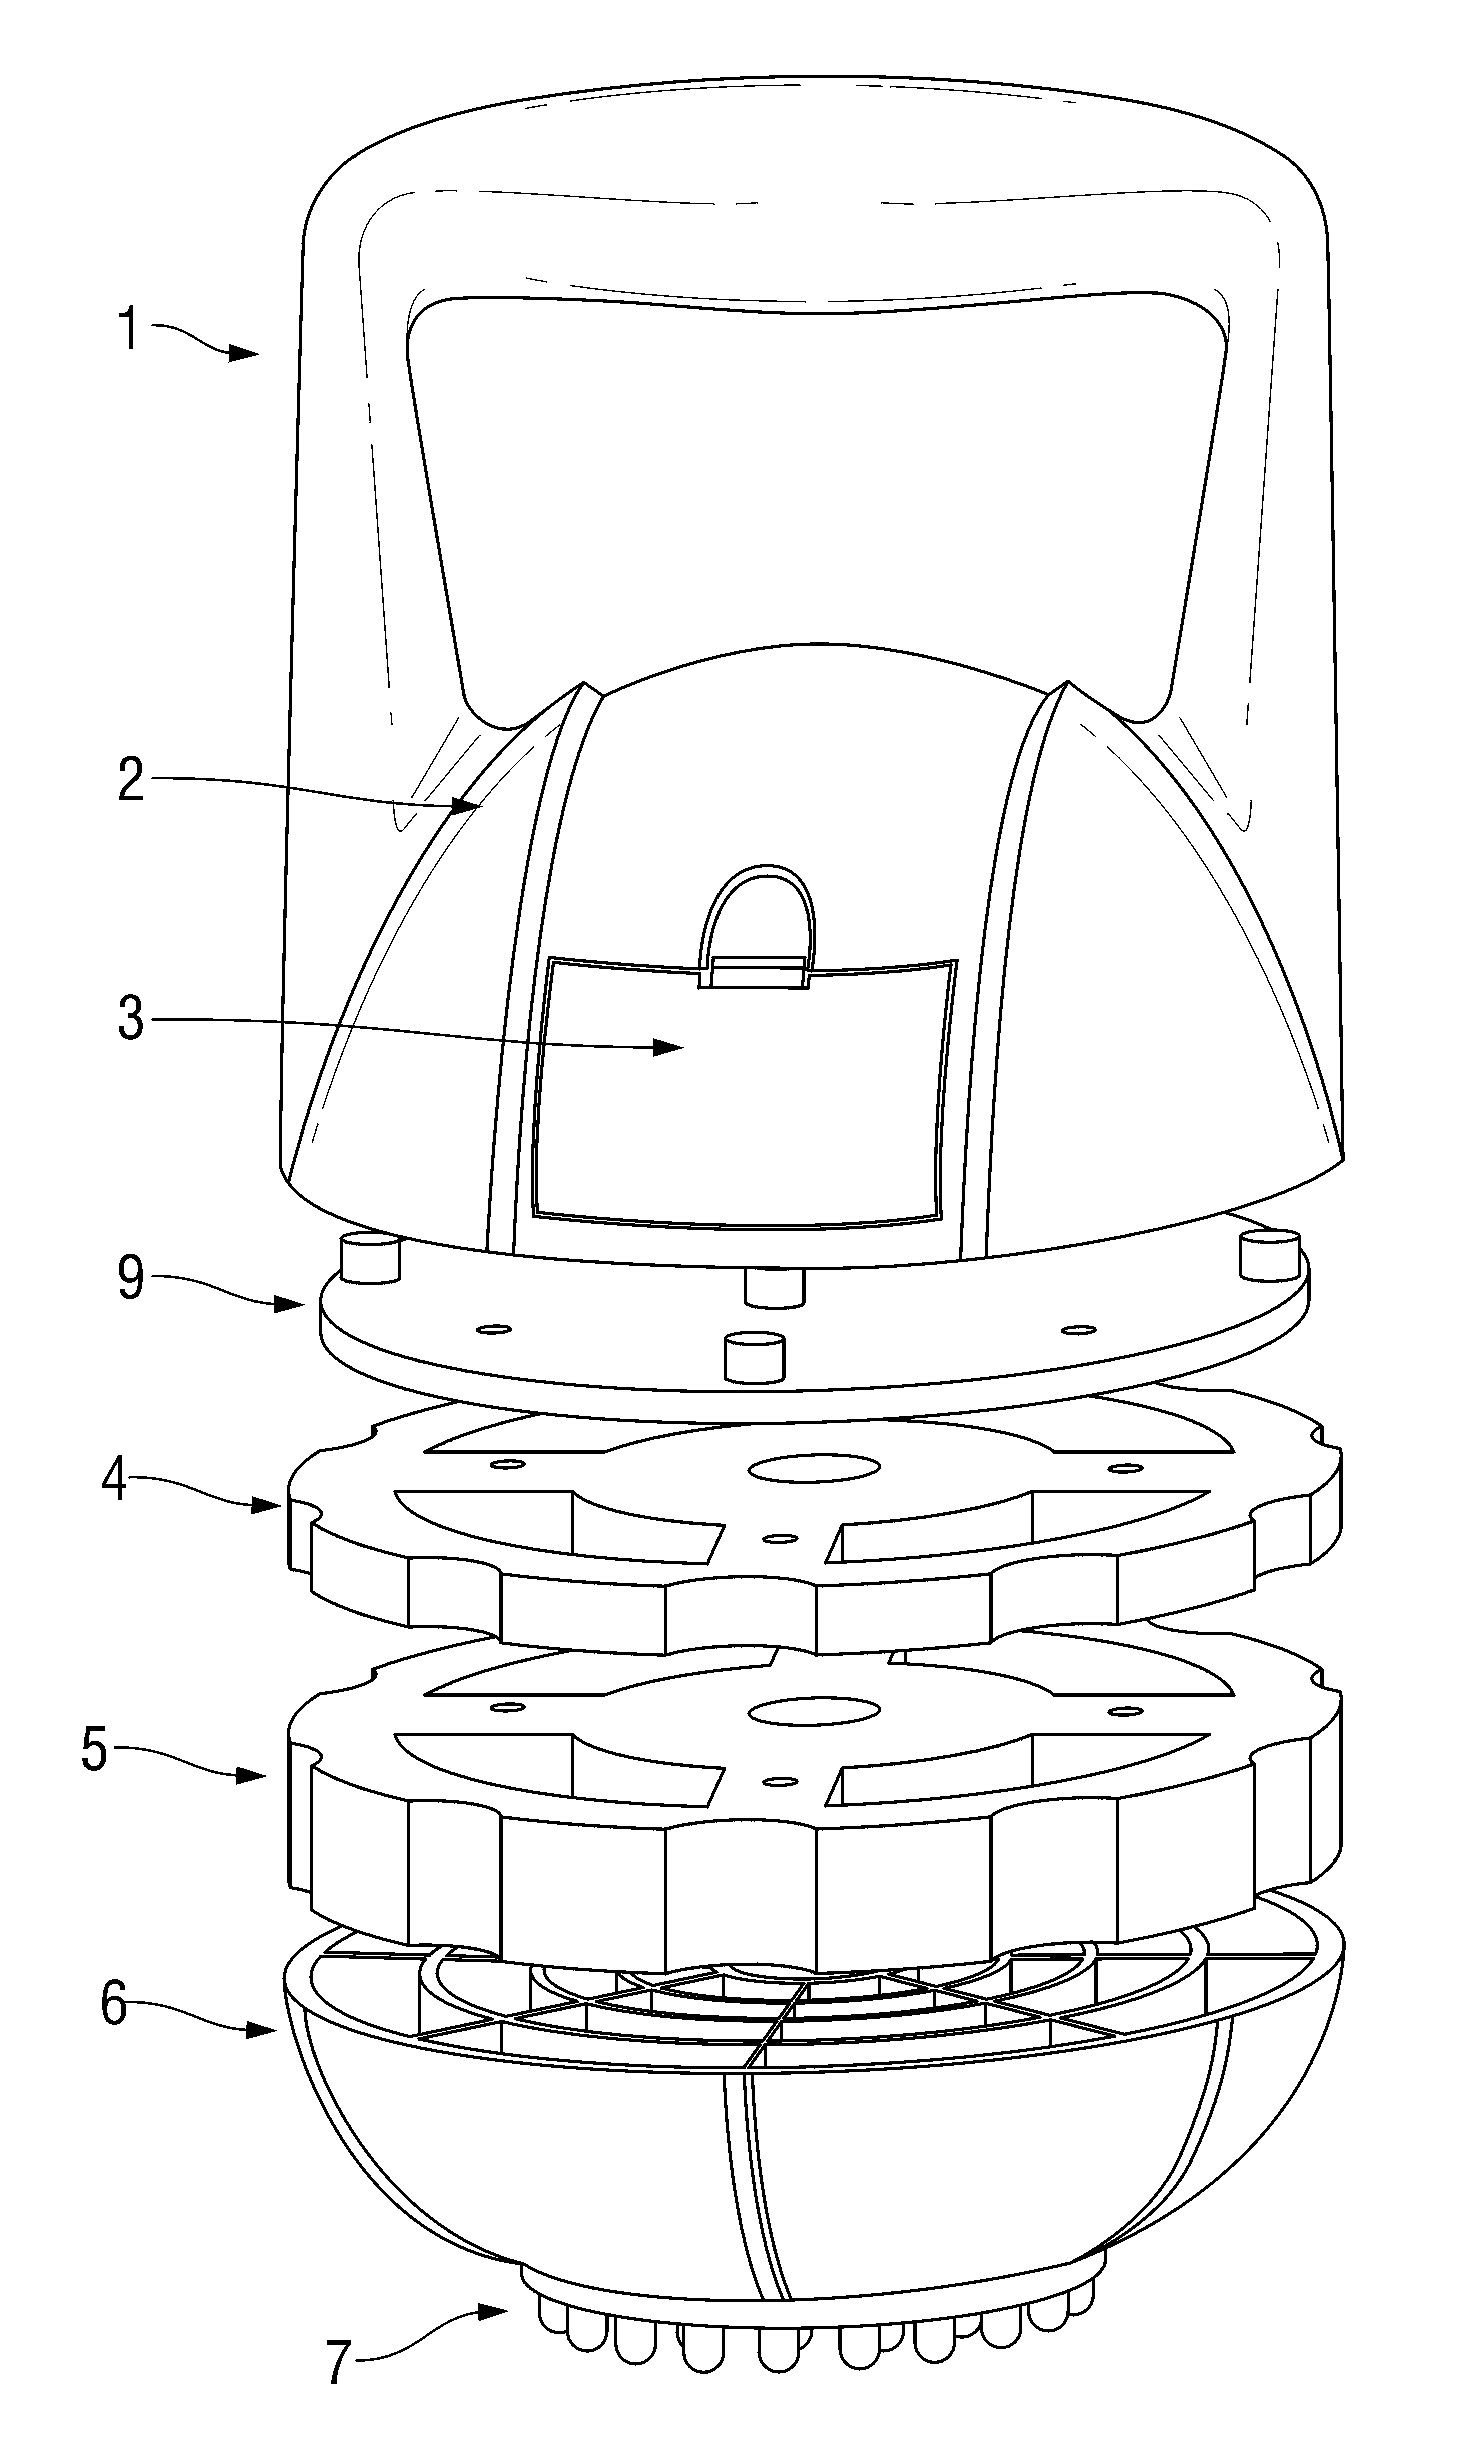 Vibratory exercise device with low center of gravity and modular weights